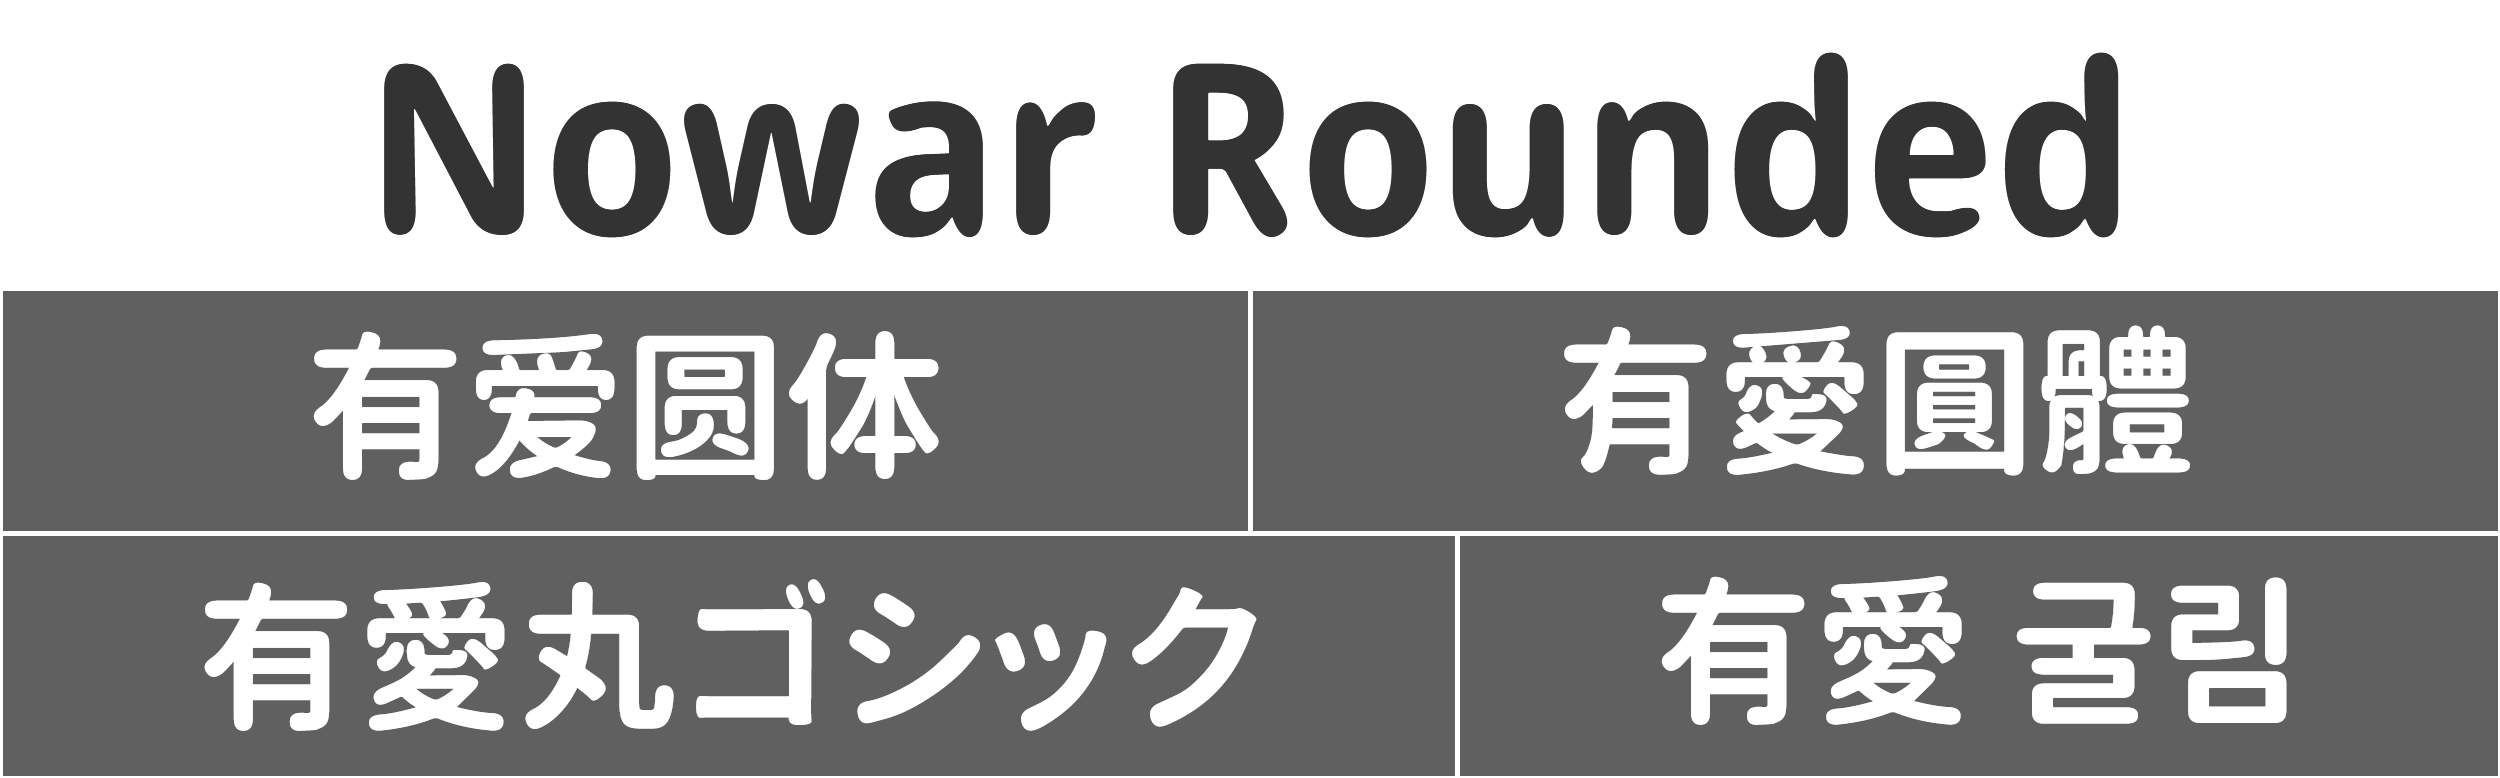 Nowar Rounded